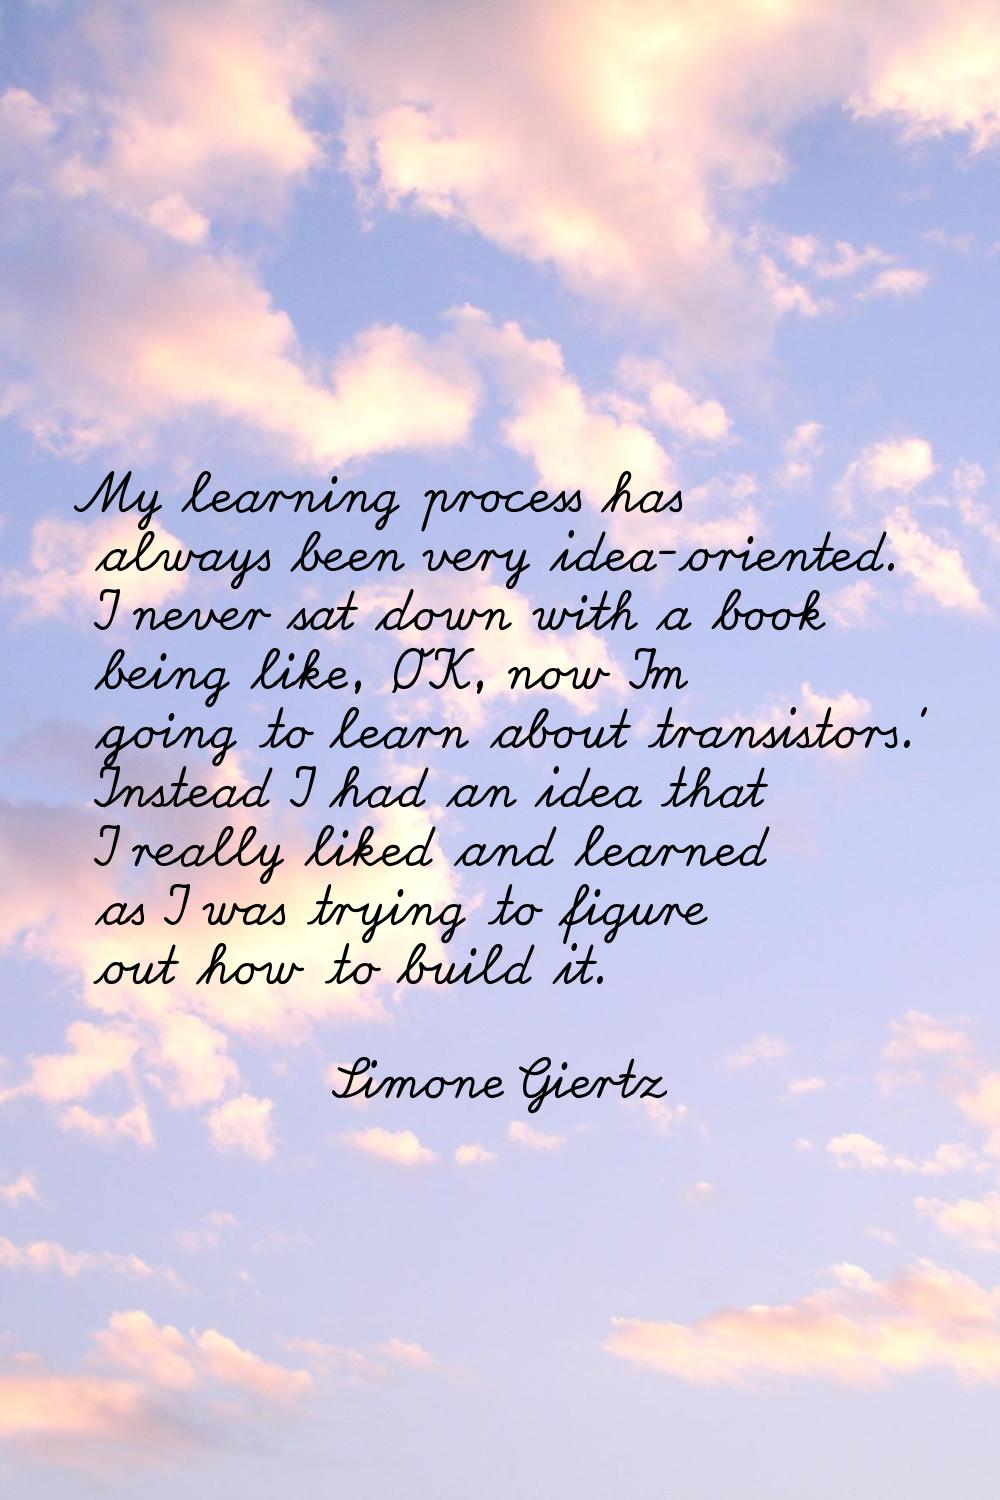 My learning process has always been very idea-oriented. I never sat down with a book being like, 'O